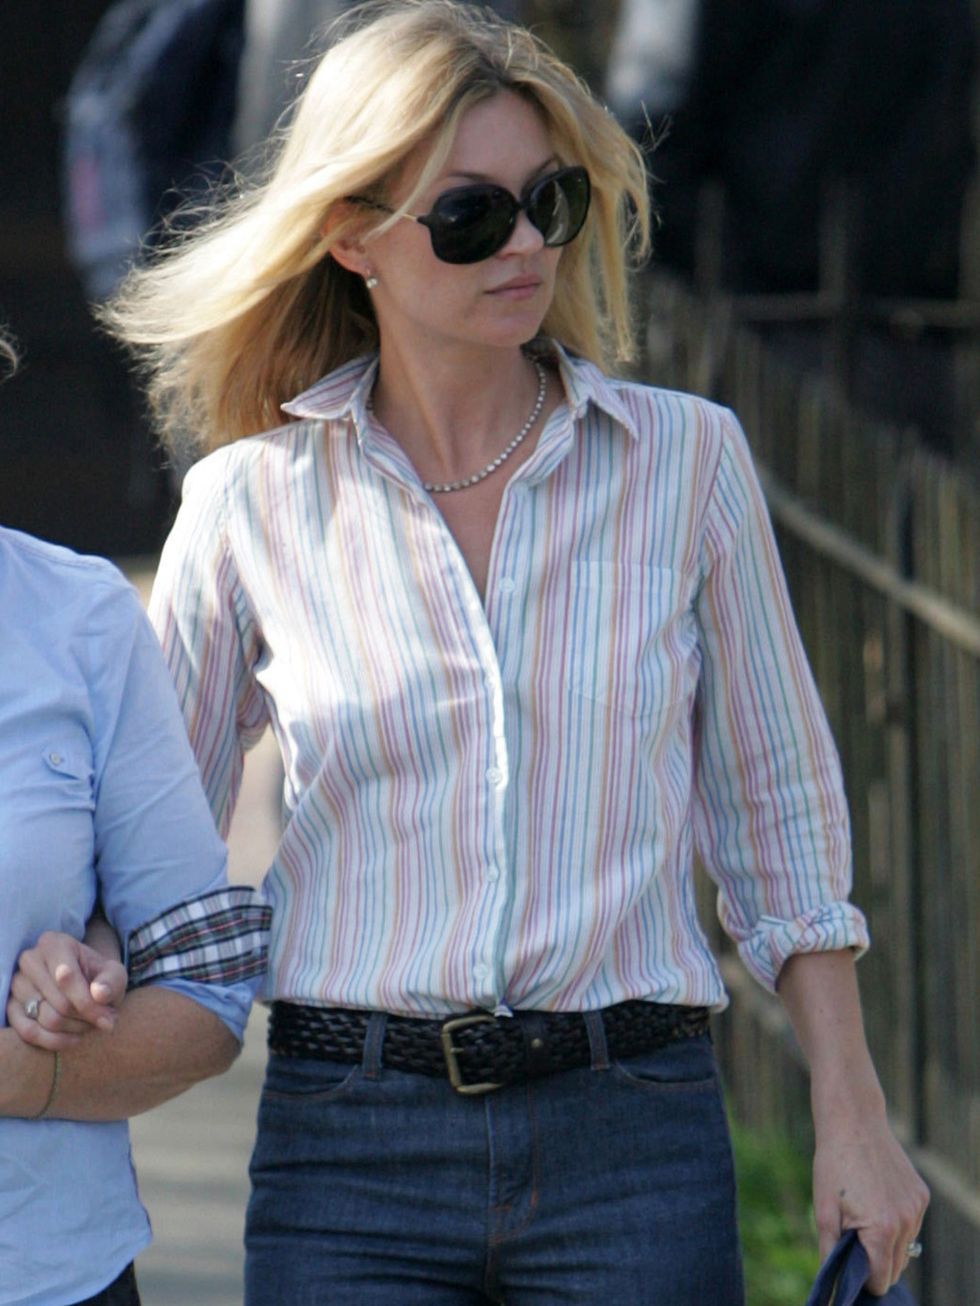 <p>Kate Moss wears a striped button down shirt with high waist jeans.</p><p><em><a href="http://www.elleuk.com/star-style/celebrity-style-files/kate-moss">View our Kate Moss Style File here</a></em></p>